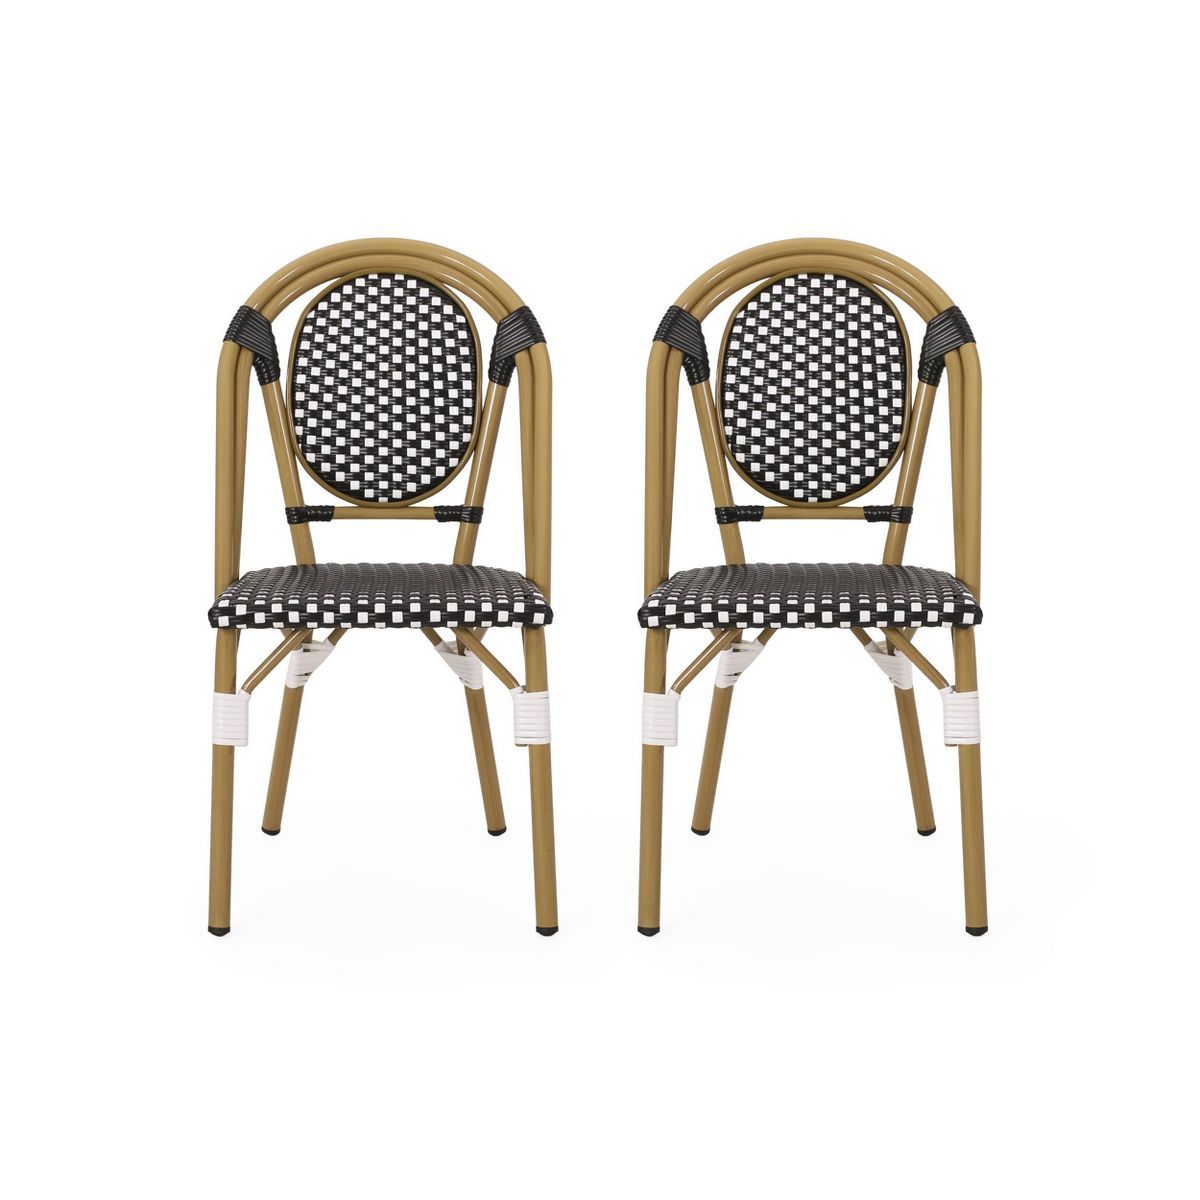 Remi 2pk Outdoor French Bistro Chairs - Black/White/Bamboo - Christopher Knight Home | Target